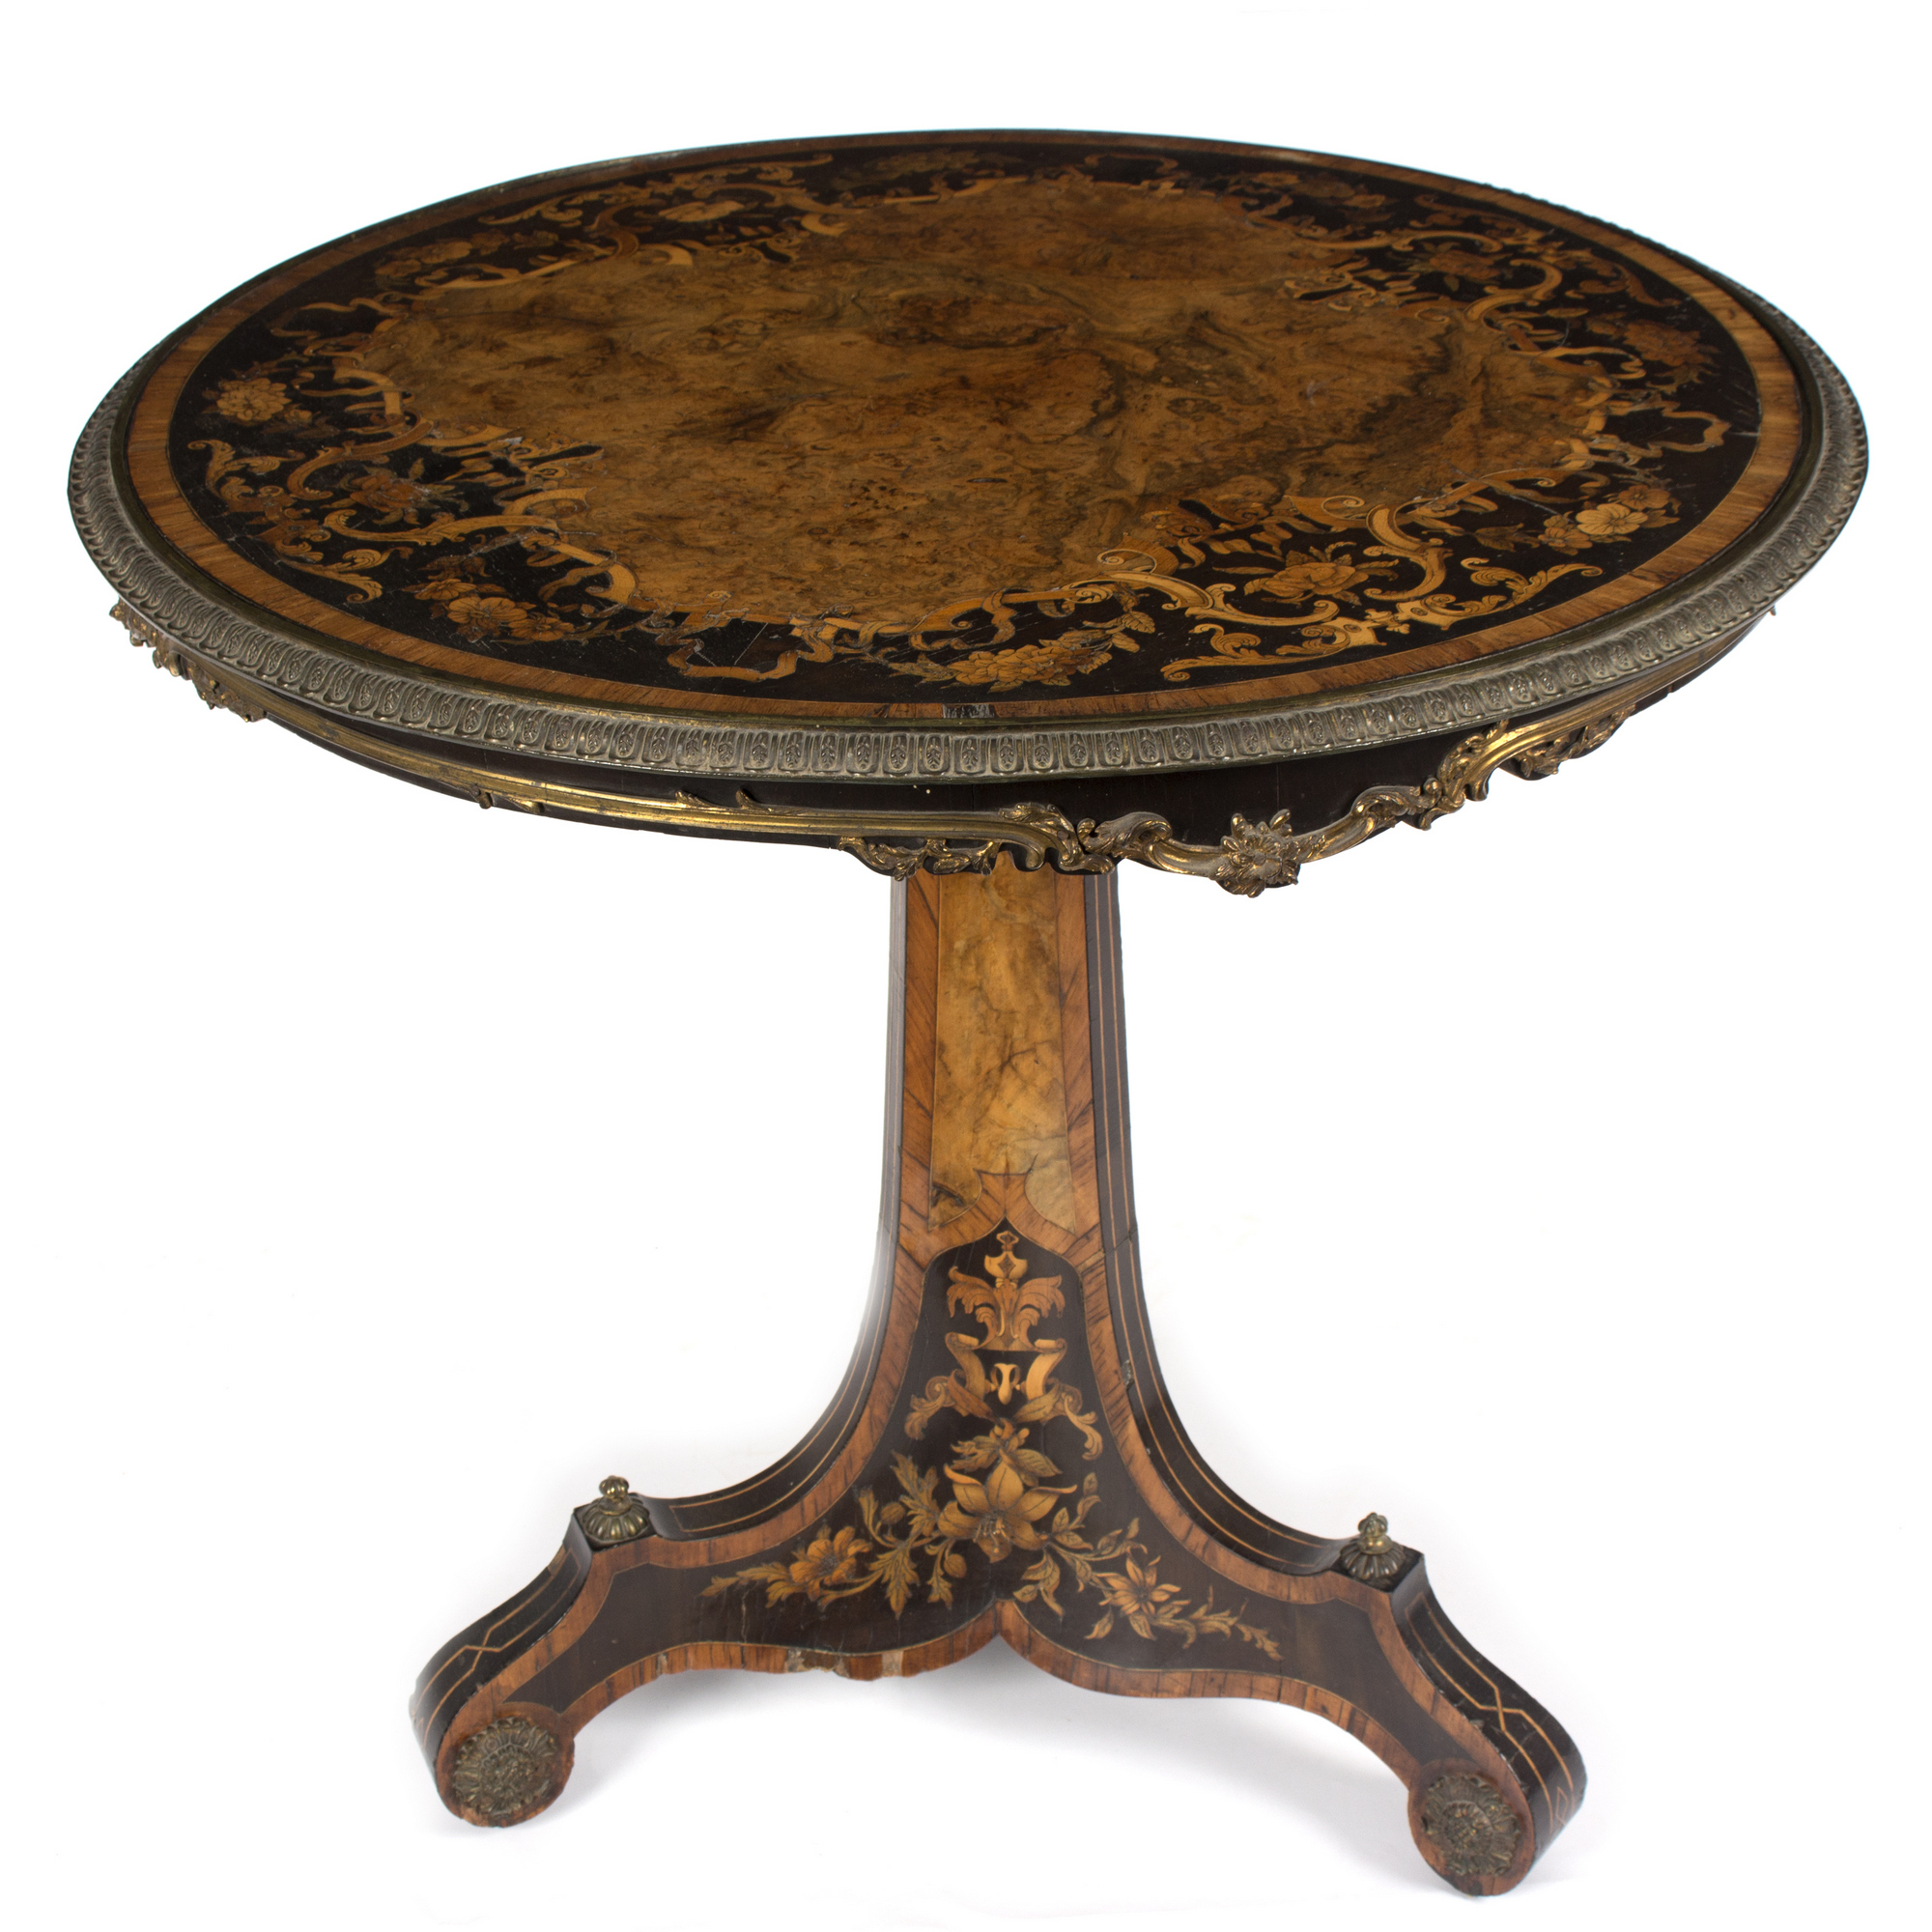 A Victorian burr walnut and marquetry circular table, in the manner of Robert Blake, - Image 4 of 11